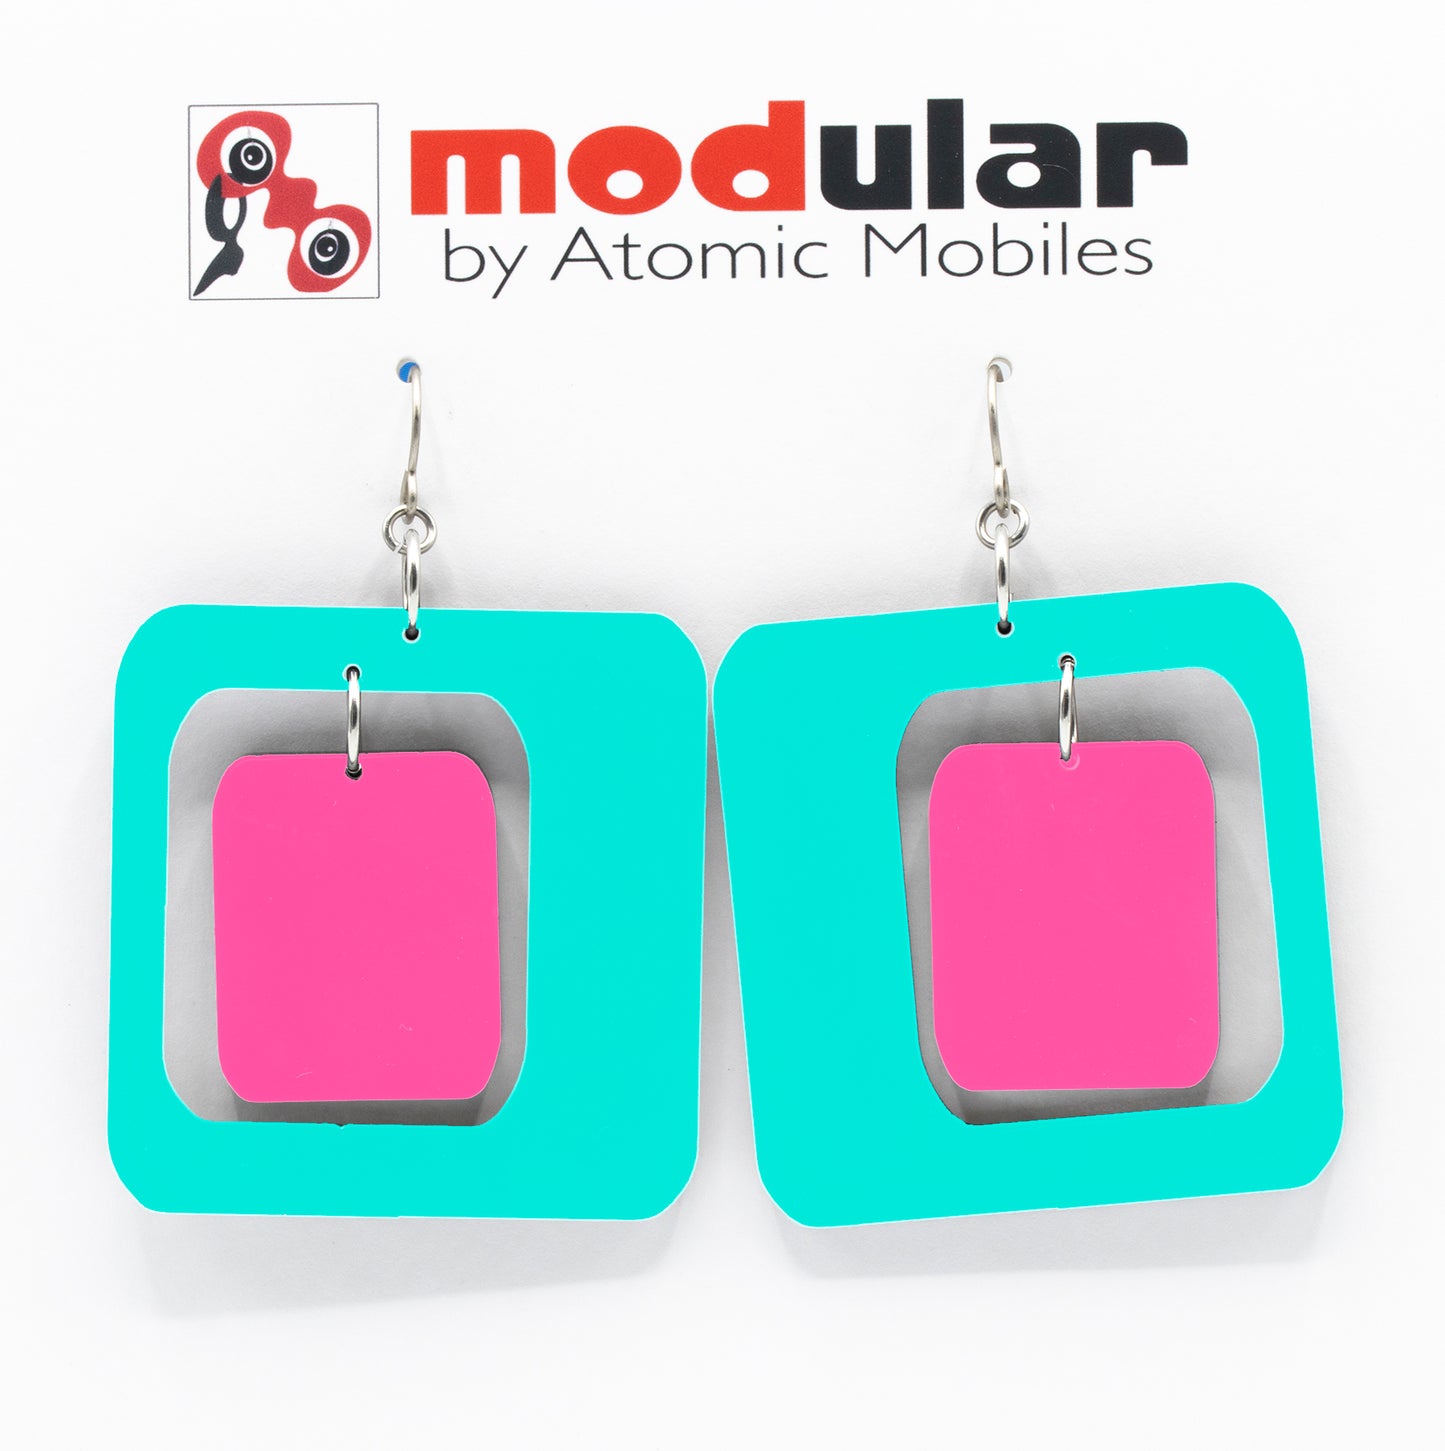 MODular Earrings - Coolsville Statement Earrings in Aqua and Hot Pink by AtomicMobiles.com - retro era inspired mod handmade jewelry